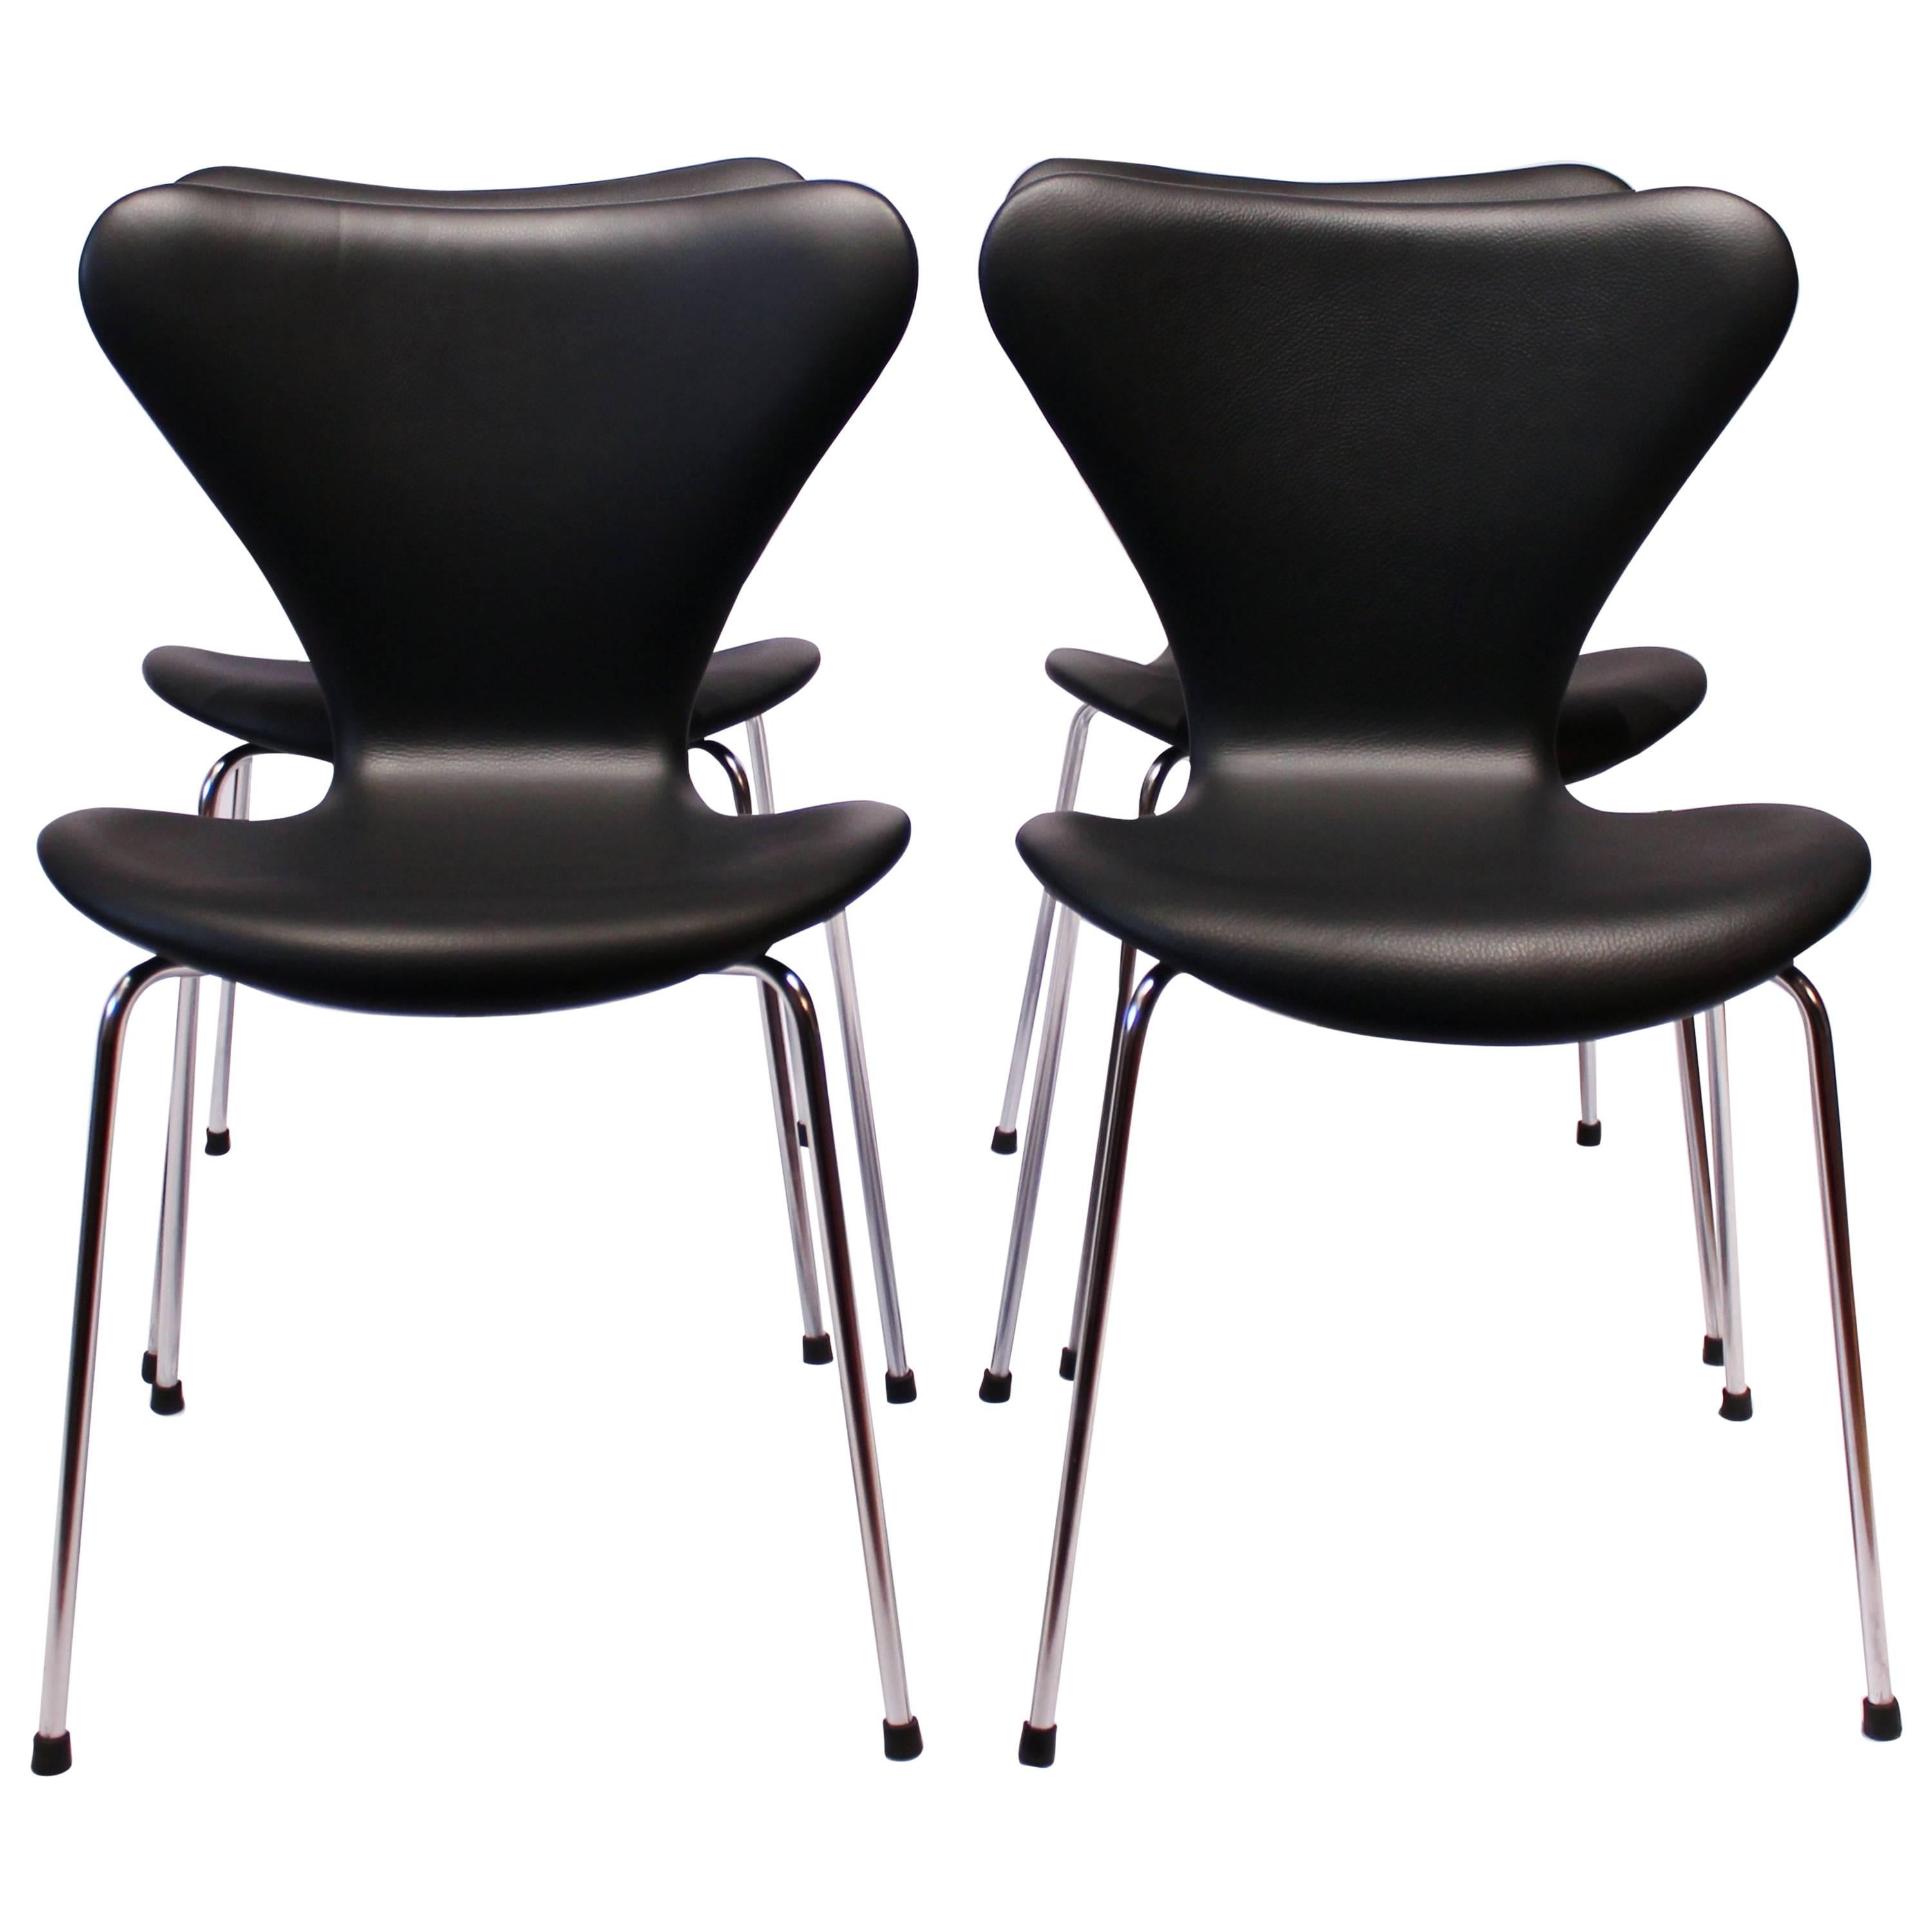 Four Seven Chairs Model 3107, in Black Leather by Arne Jacobsen and Fritz Hansen